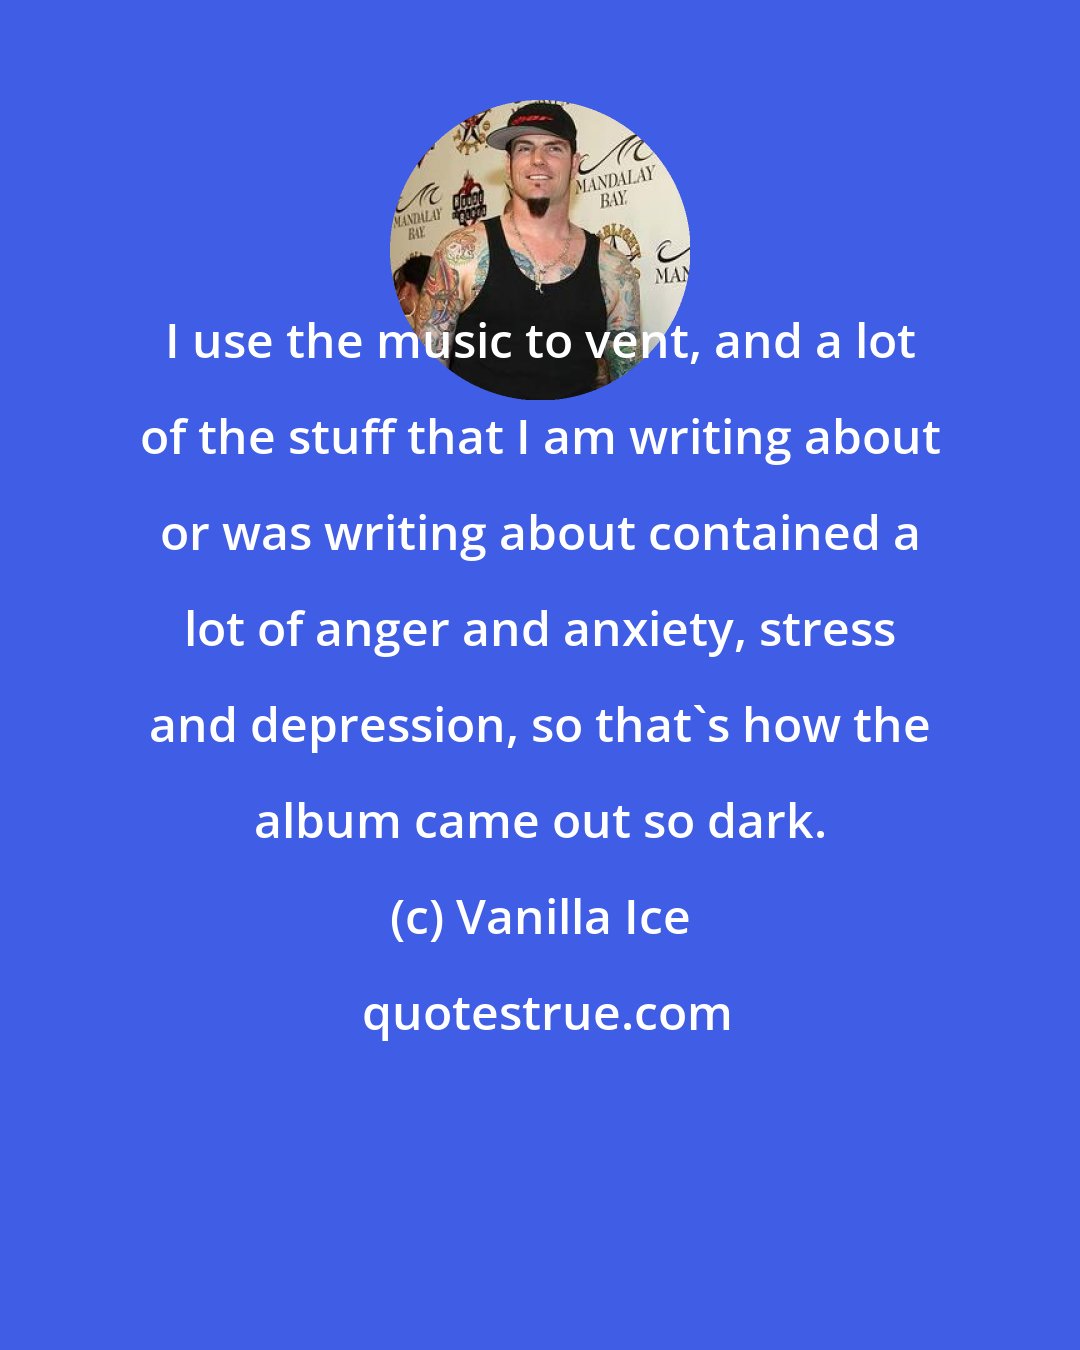 Vanilla Ice: I use the music to vent, and a lot of the stuff that I am writing about or was writing about contained a lot of anger and anxiety, stress and depression, so that's how the album came out so dark.